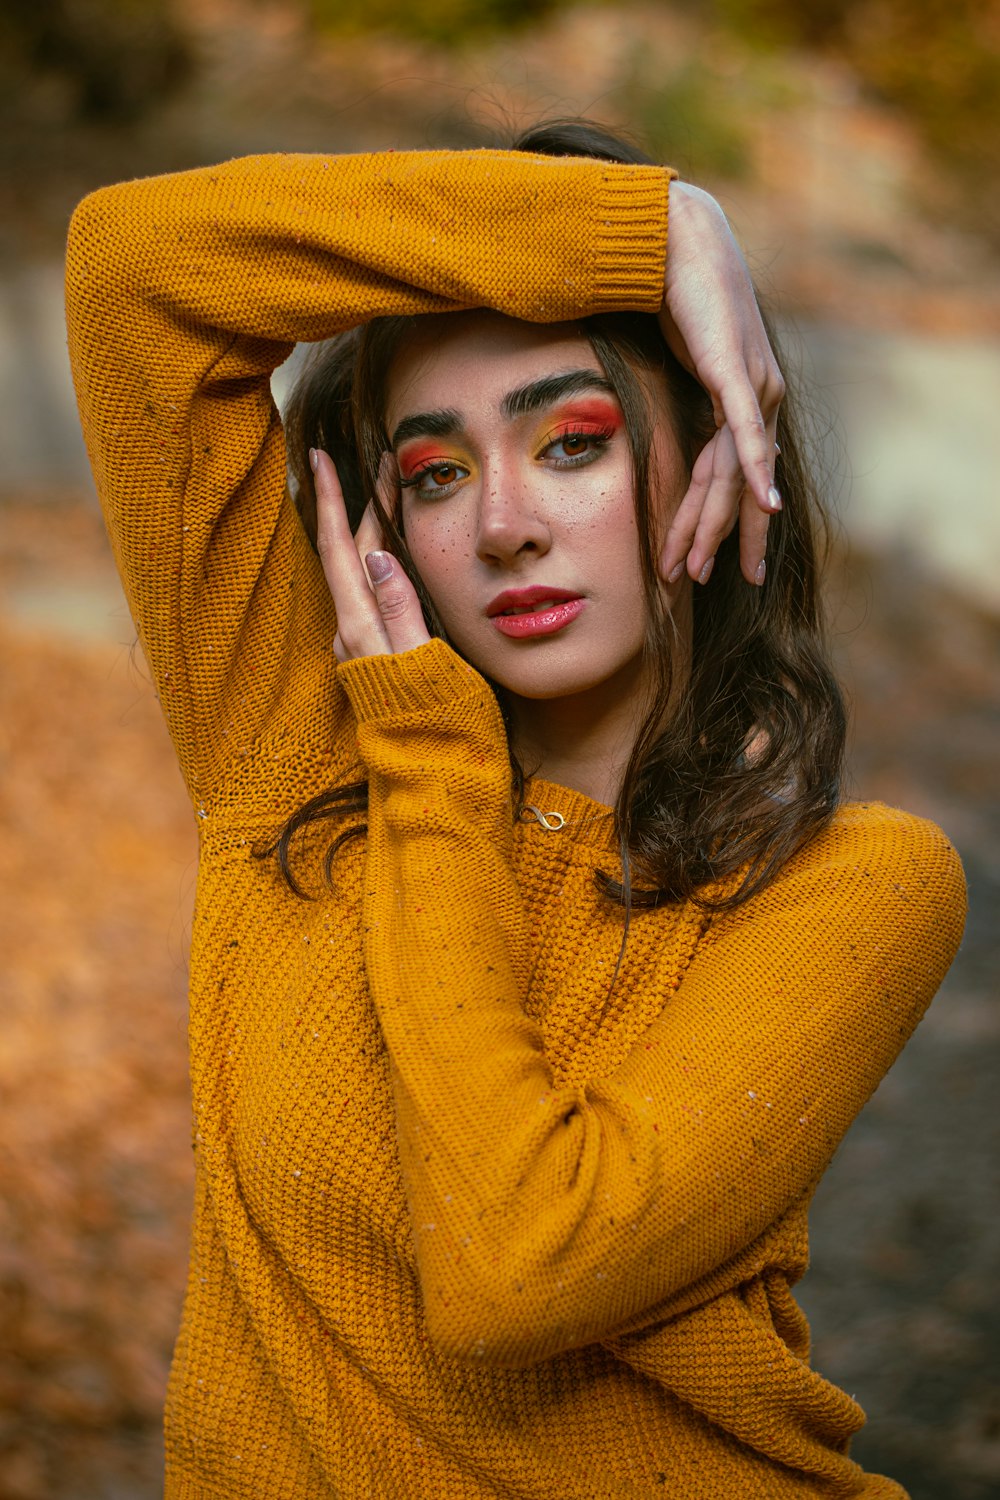 a woman in a yellow sweater is posing for a picture